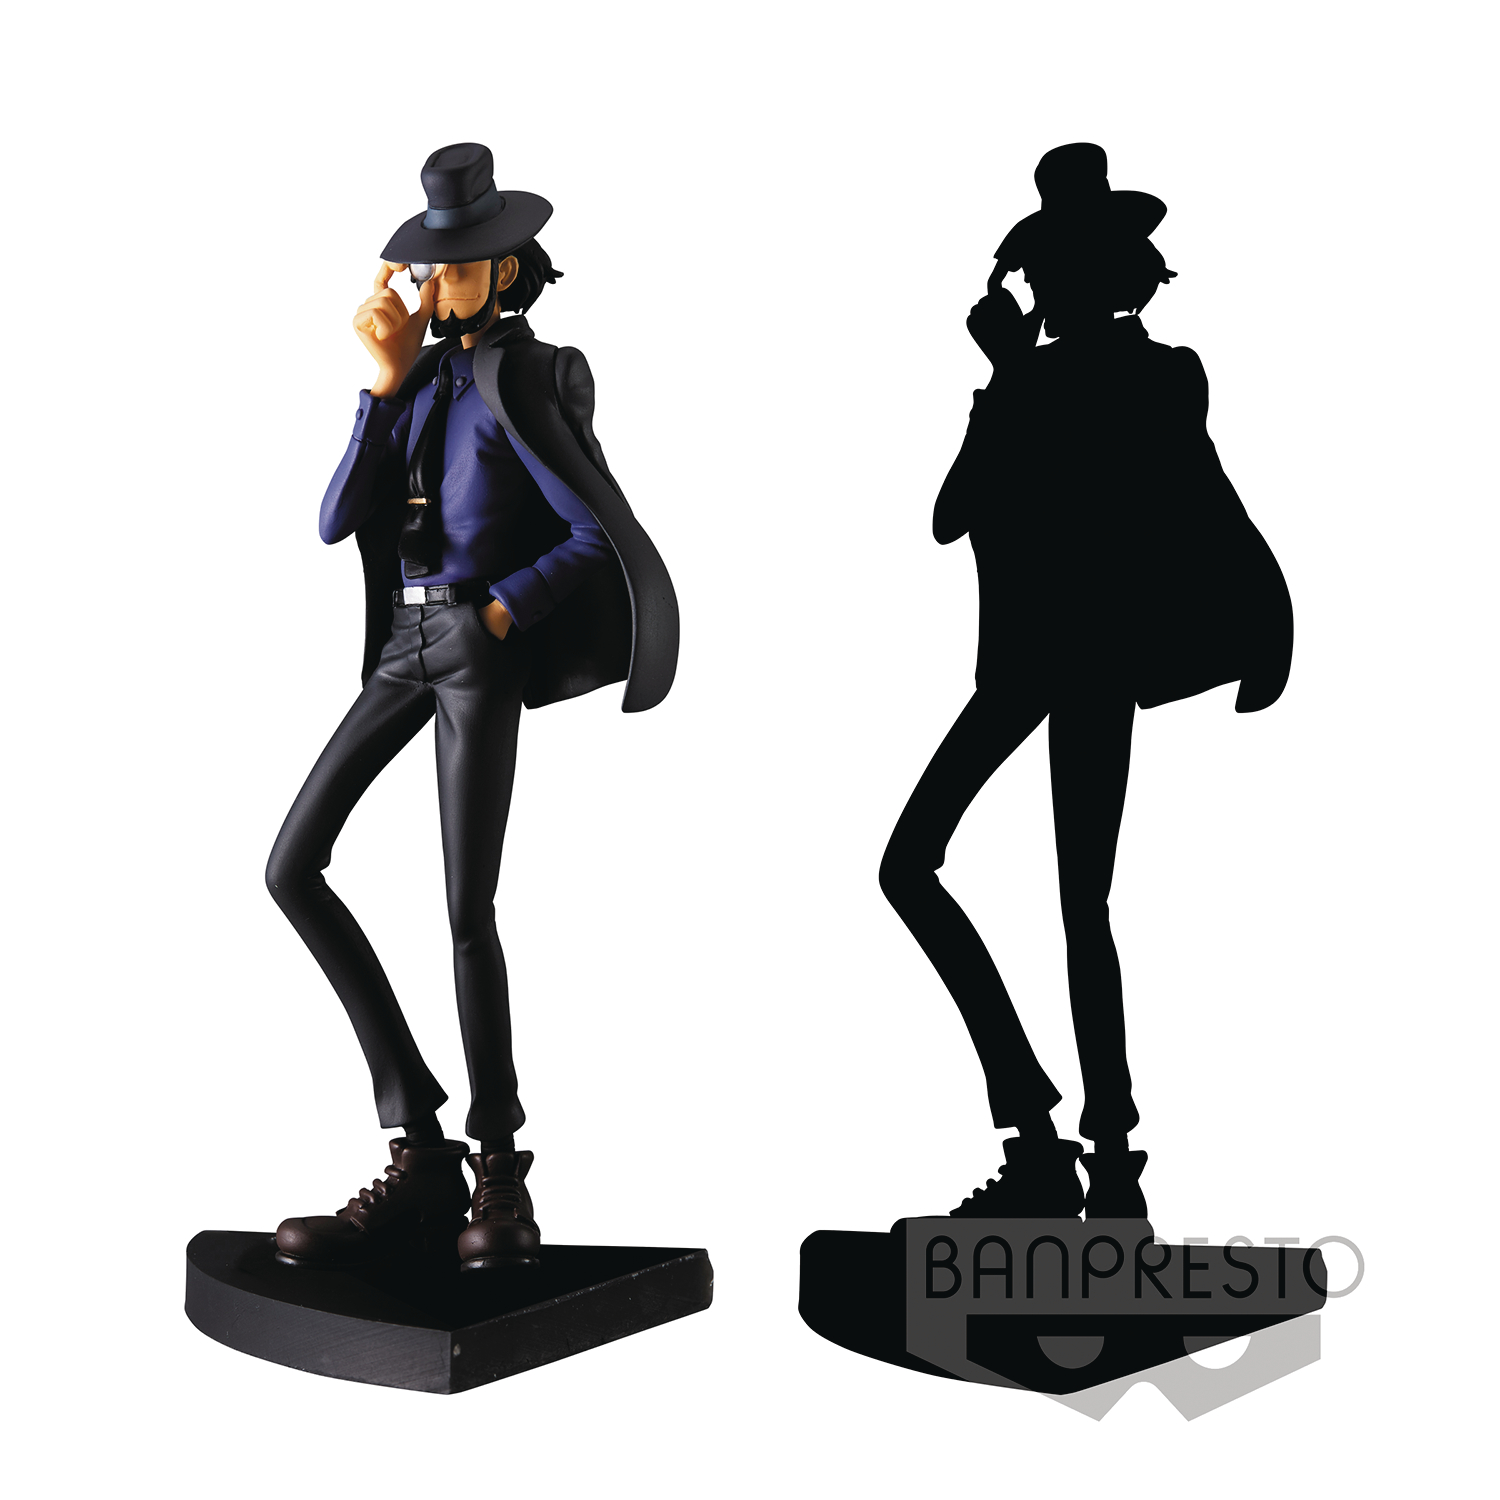 Creator X Creator Vol.2: Lupin the Third New Misc Action Figure Color 